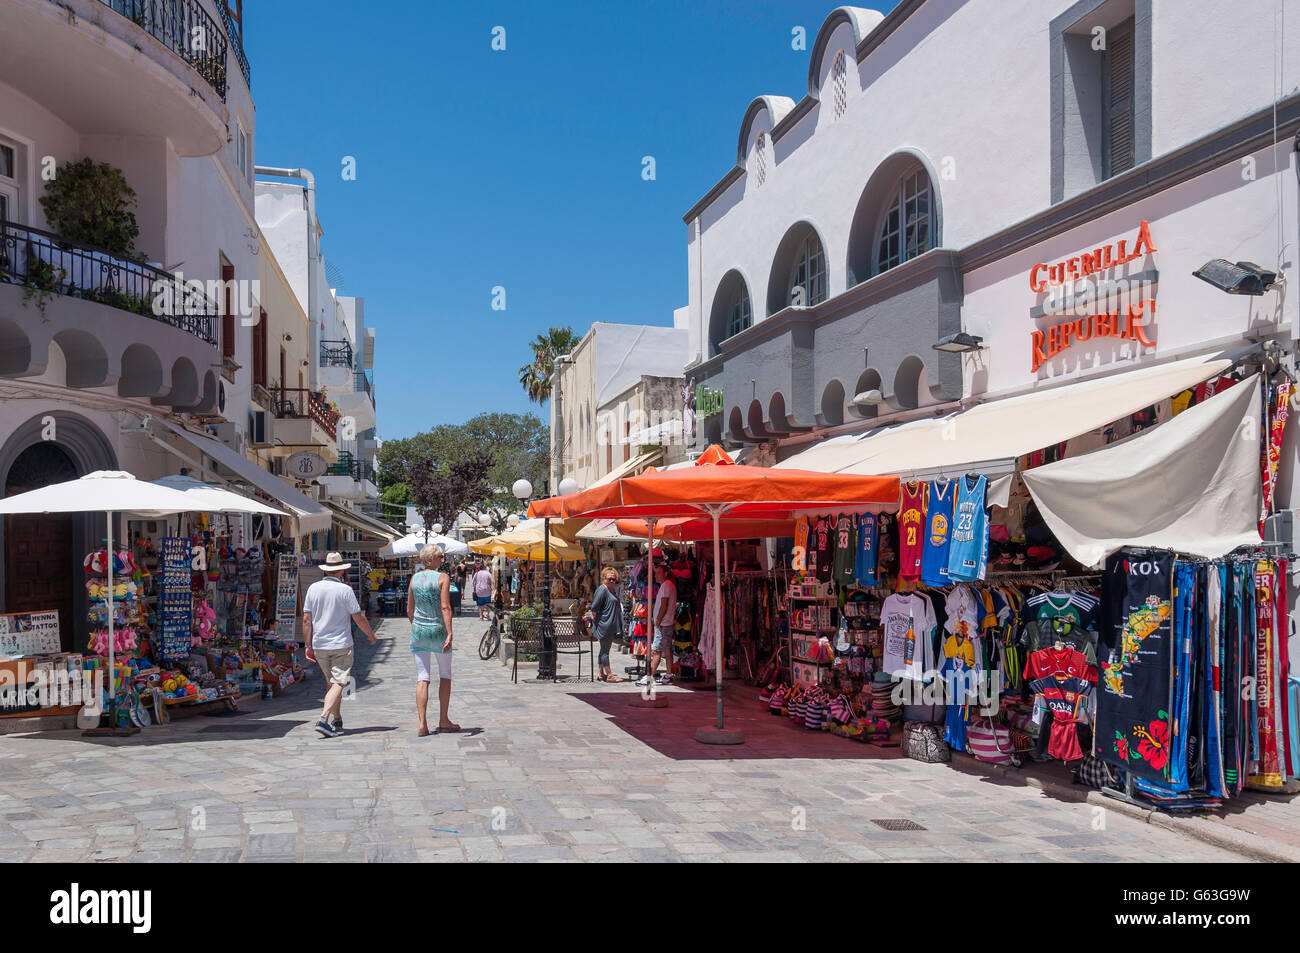 Tourist shops in Old Town, Kos Town, Kos (Cos), The Dodecanese, South Aegean Region, Greece Stock Photo